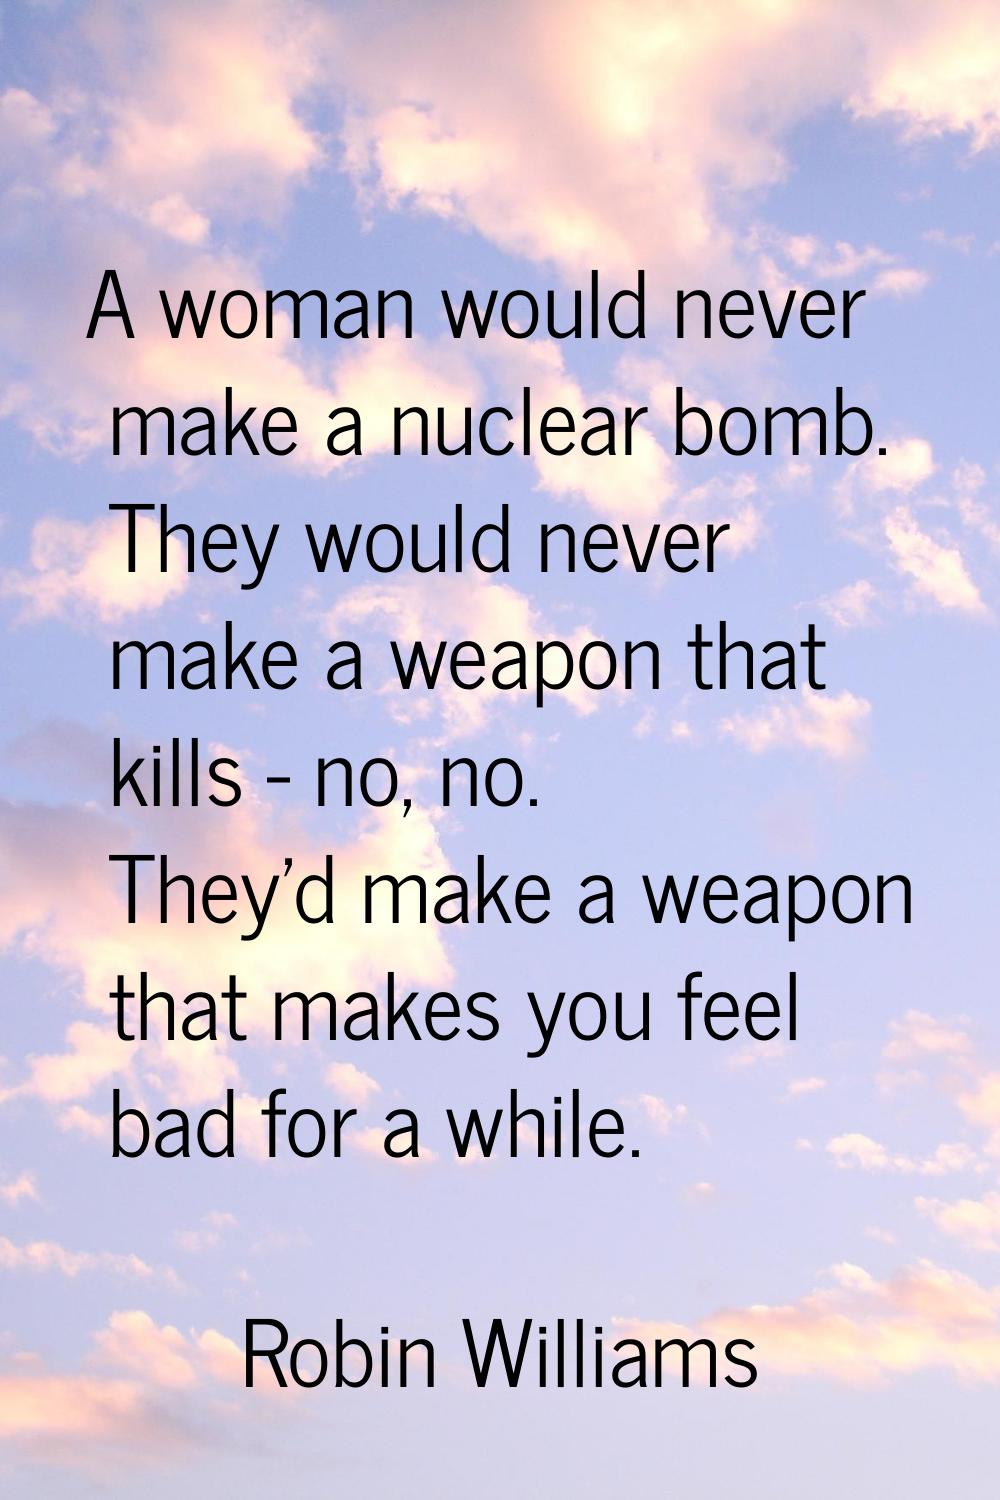 A woman would never make a nuclear bomb. They would never make a weapon that kills - no, no. They'd